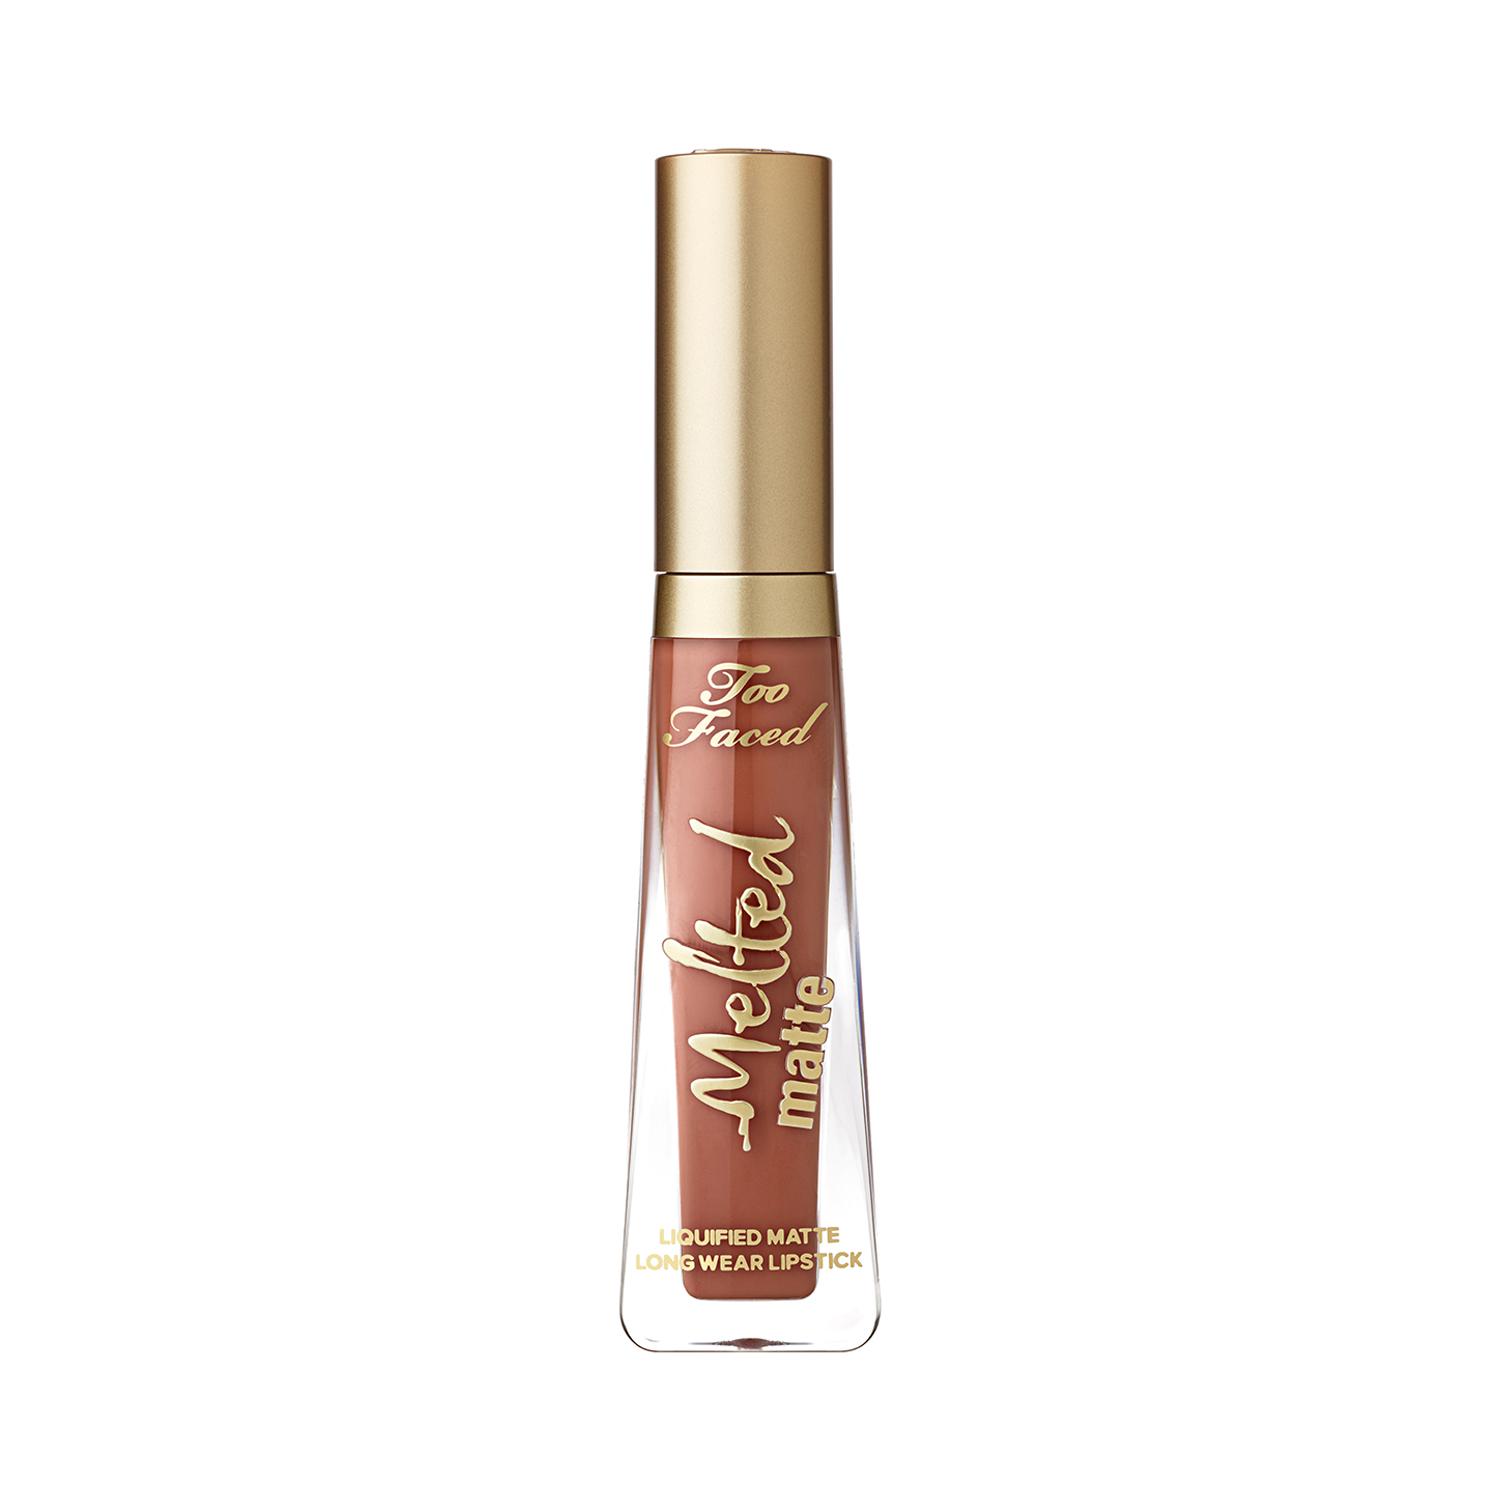 Too Faced Melted Matte Lipstick - Makin' Moves (7ml)